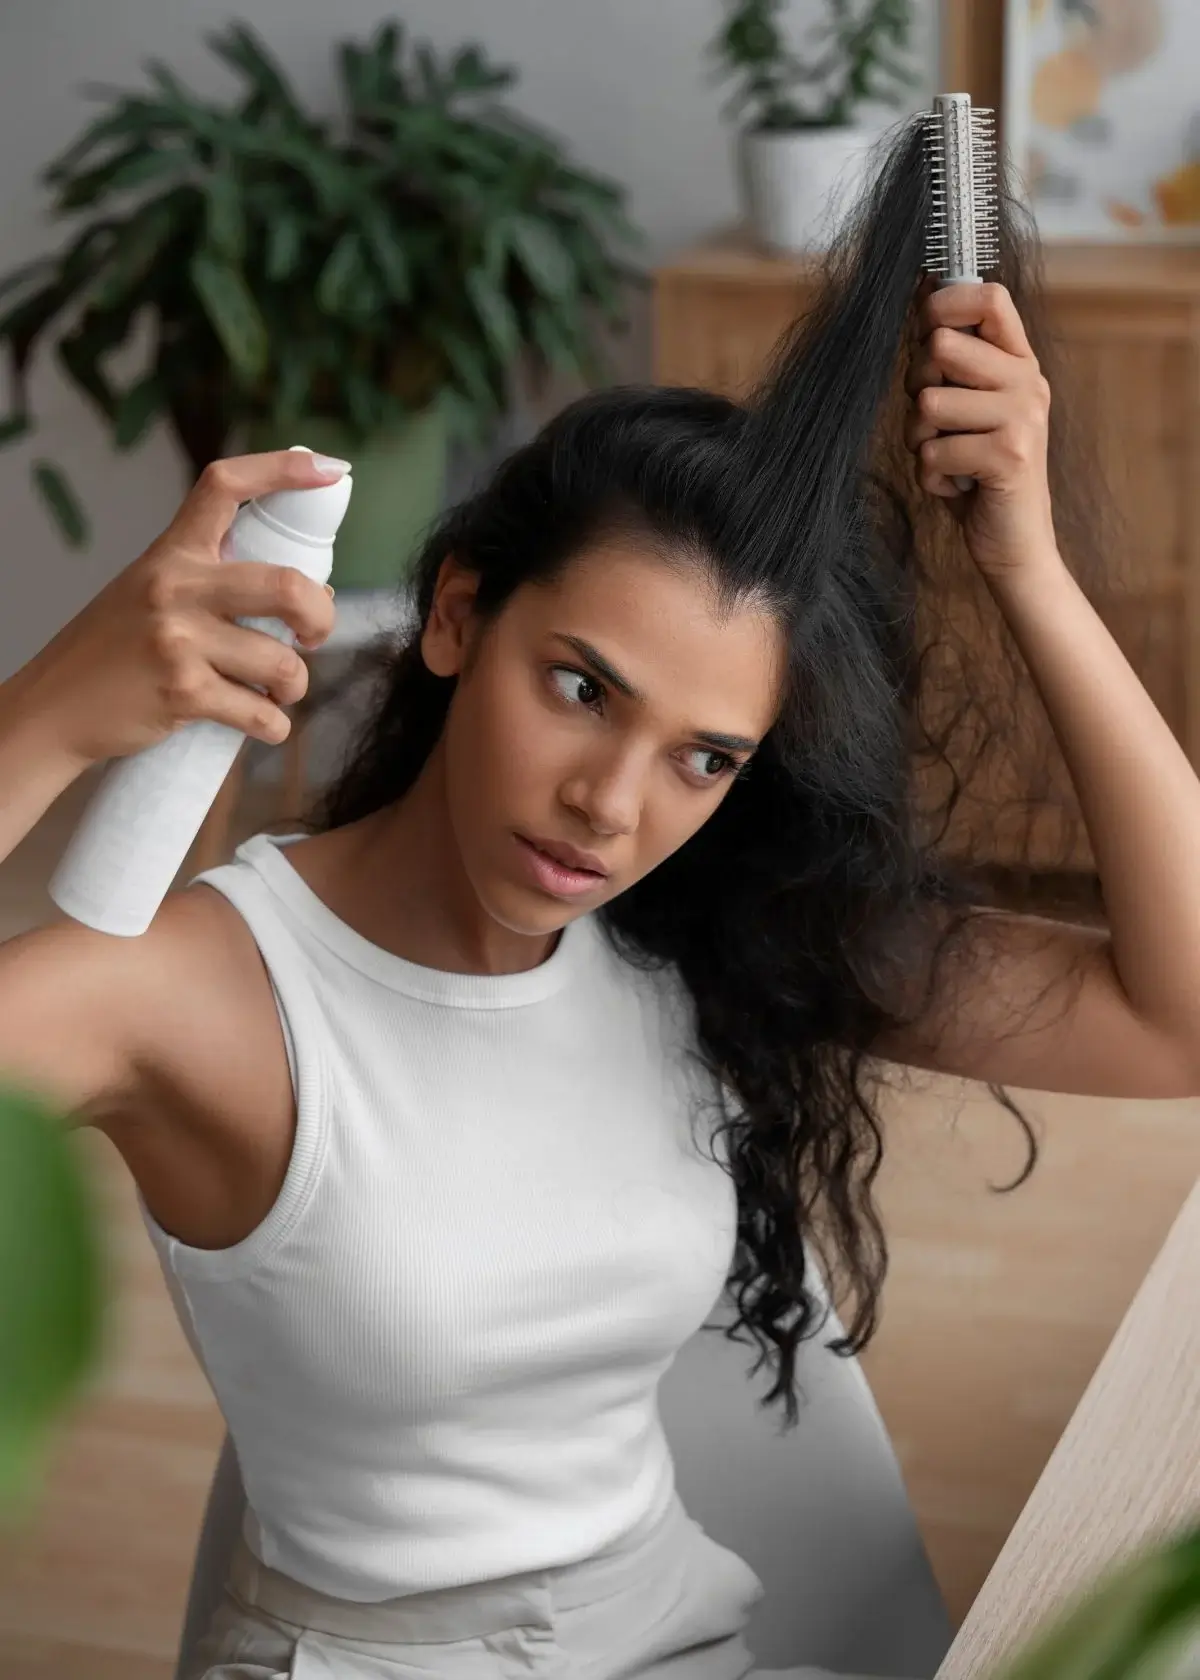 How to choose the right alcohol-free hair spray?